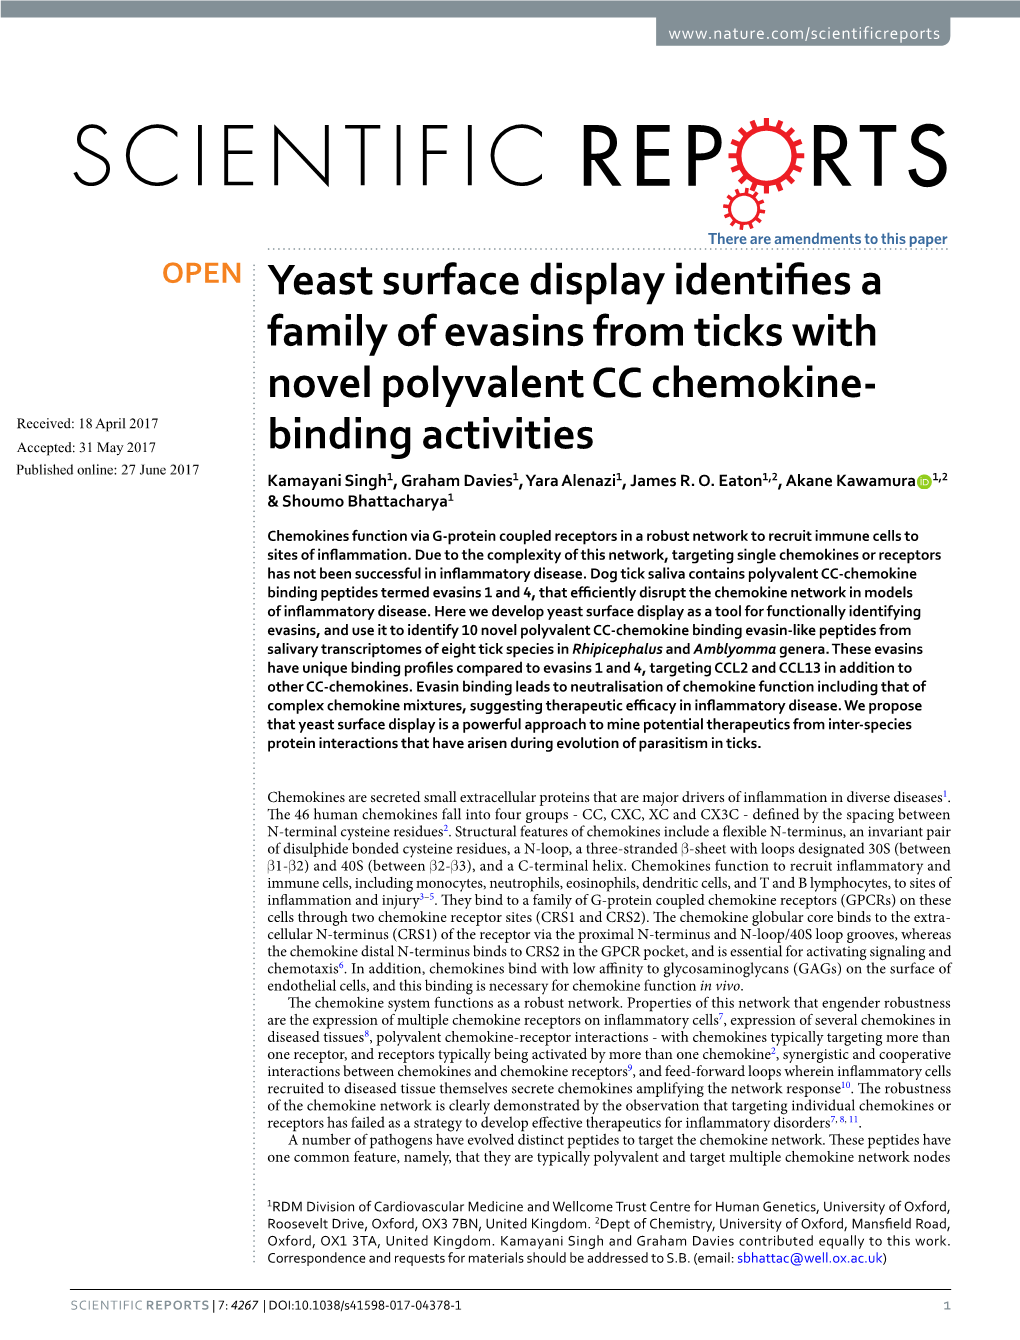 Yeast Surface Display Identifies a Family of Evasins from Ticks With